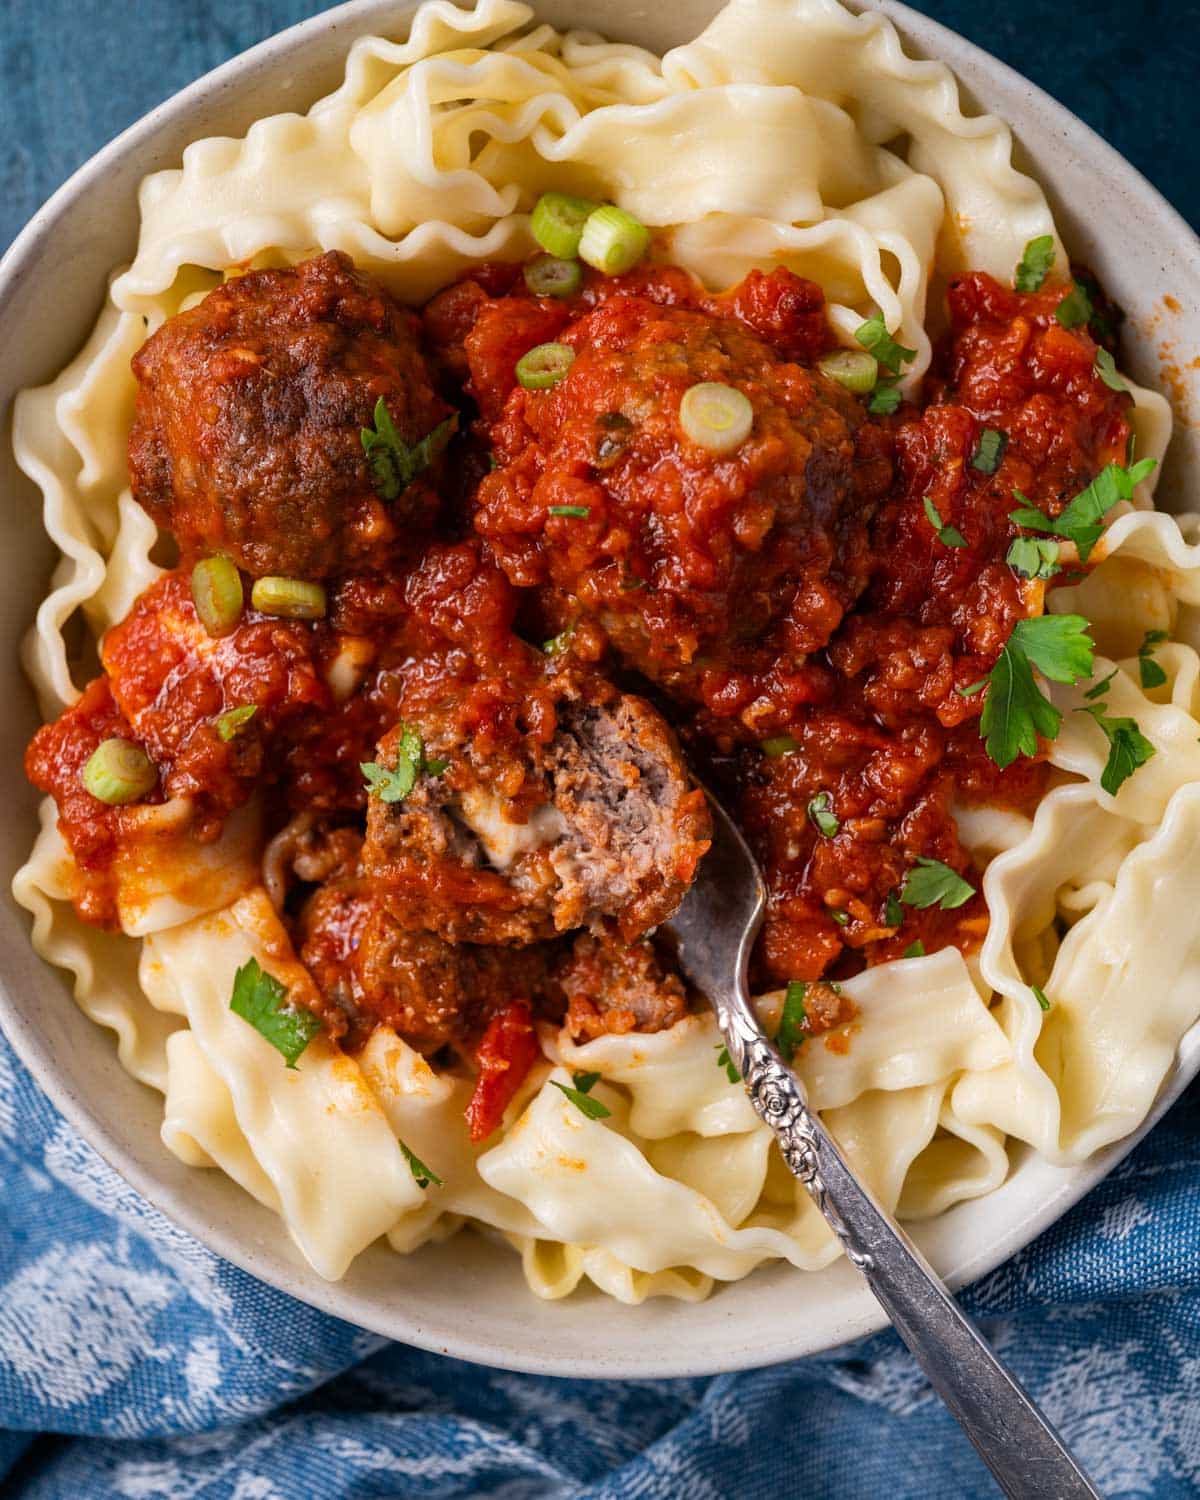 meatballs over pasta in a bowl